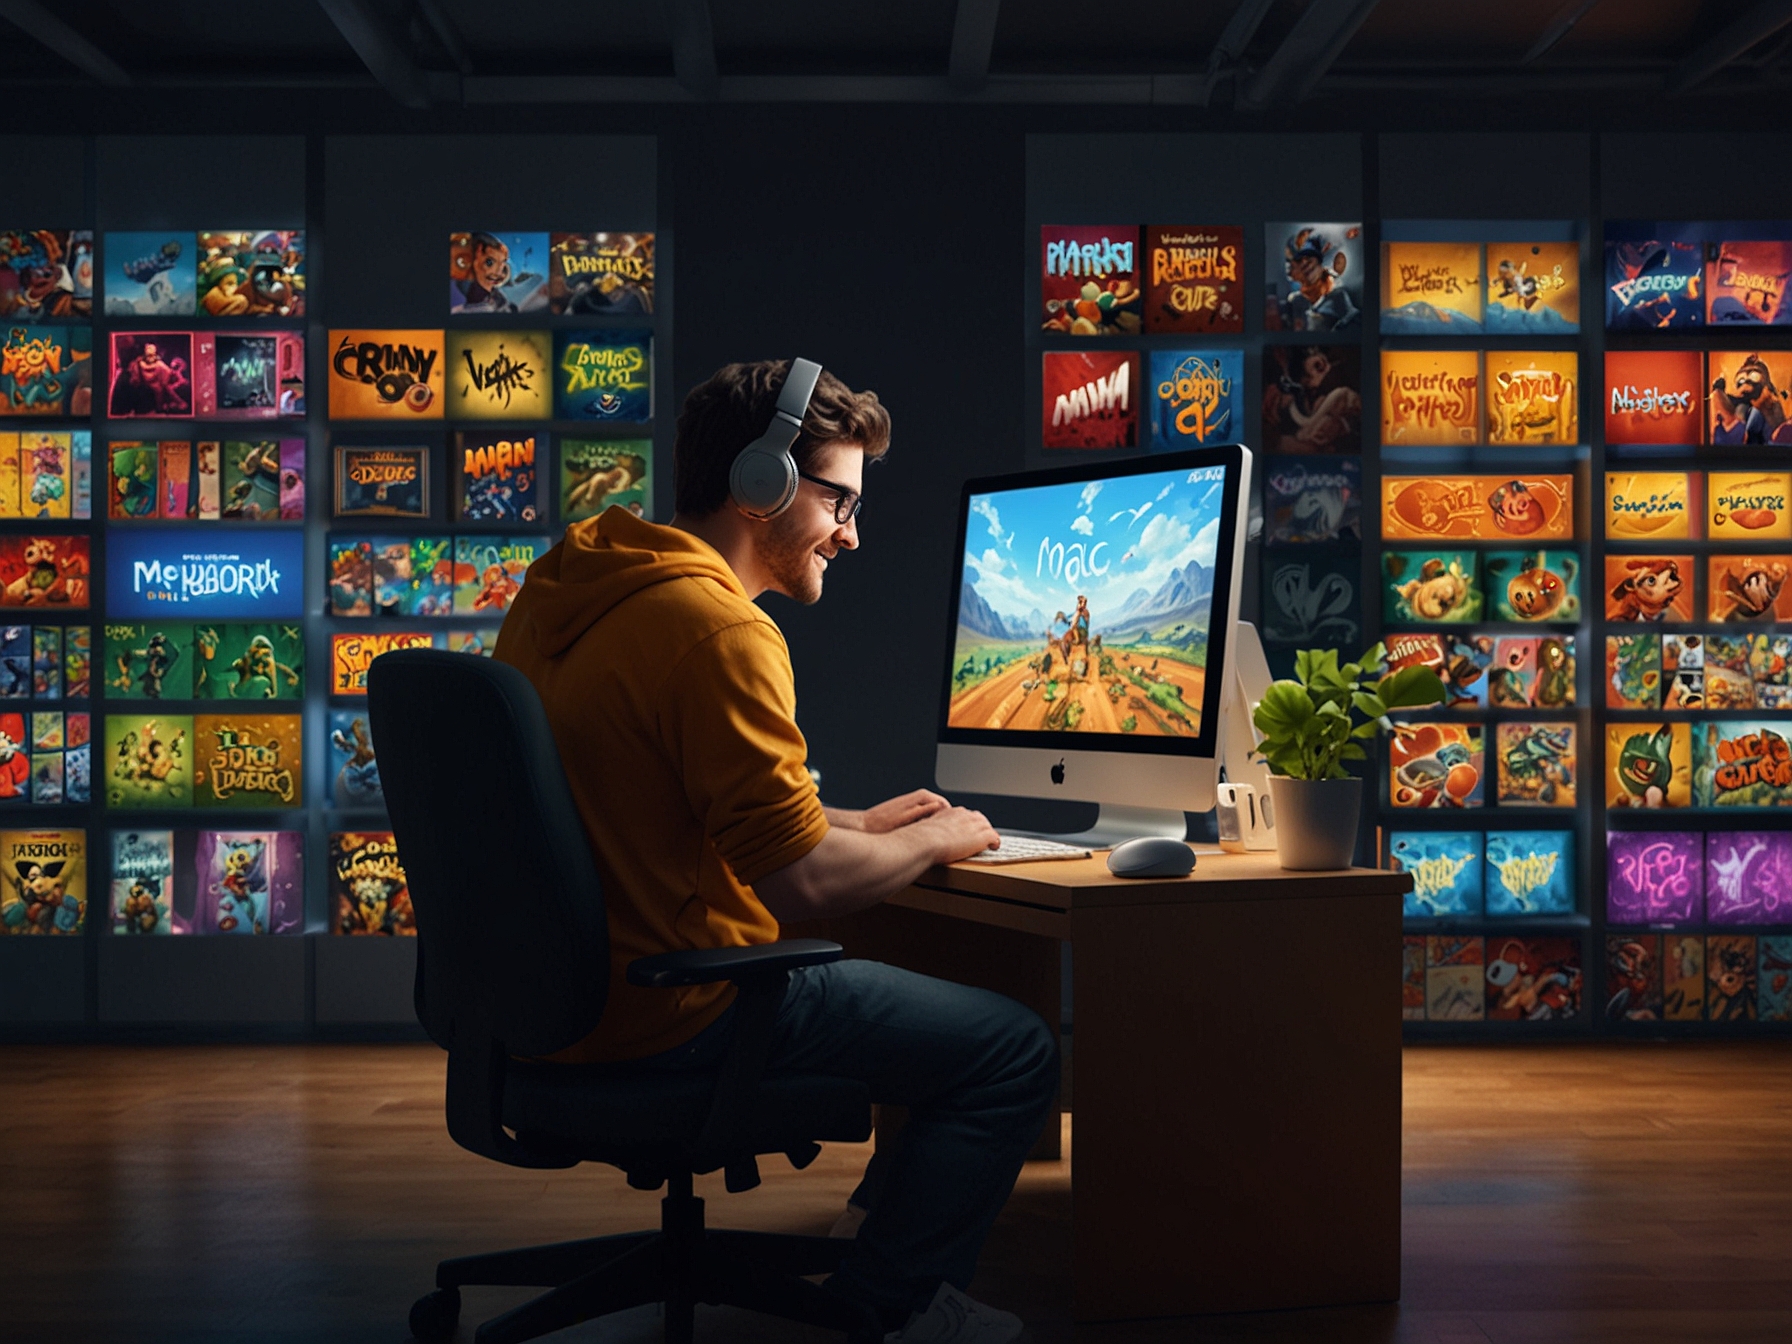 A happy gamer sitting in front of a Mac, excitedly browsing the Mac App Store's discounted games section, with various titles' titles and prices visible on the screen.